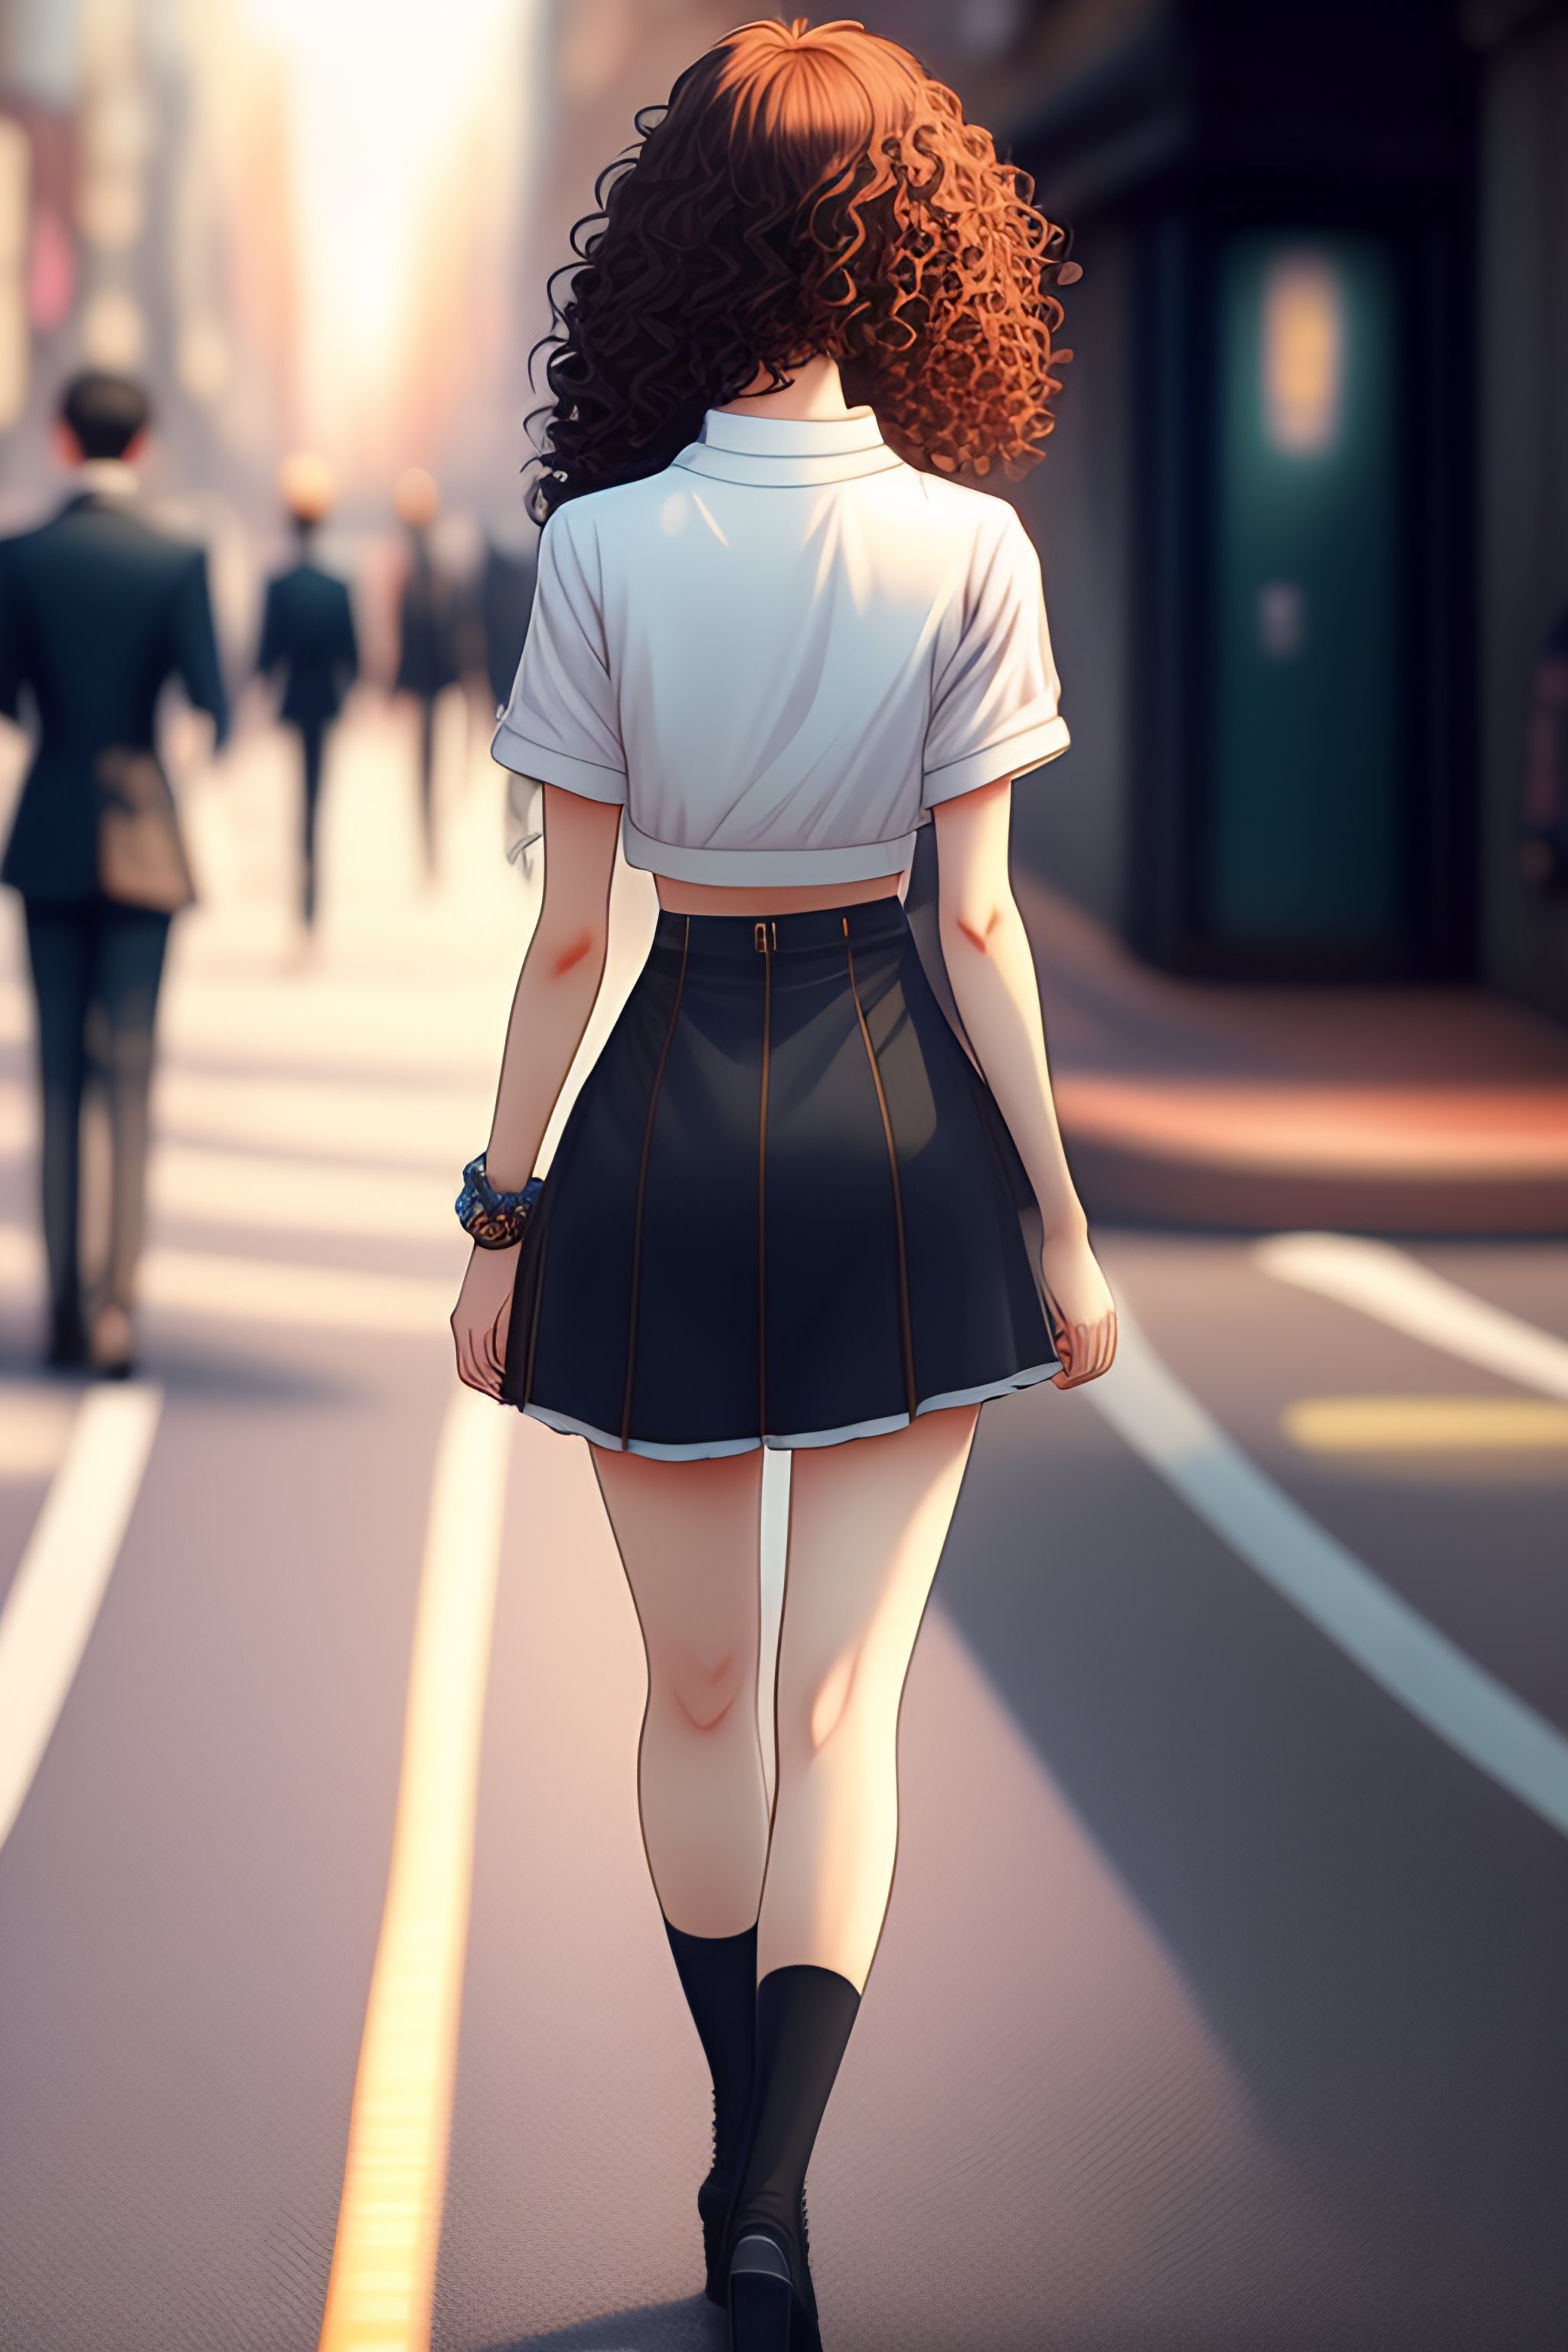 Lexica Anime Style Cute Anime Girl Years Old Back View Far From Camera Medium Curly